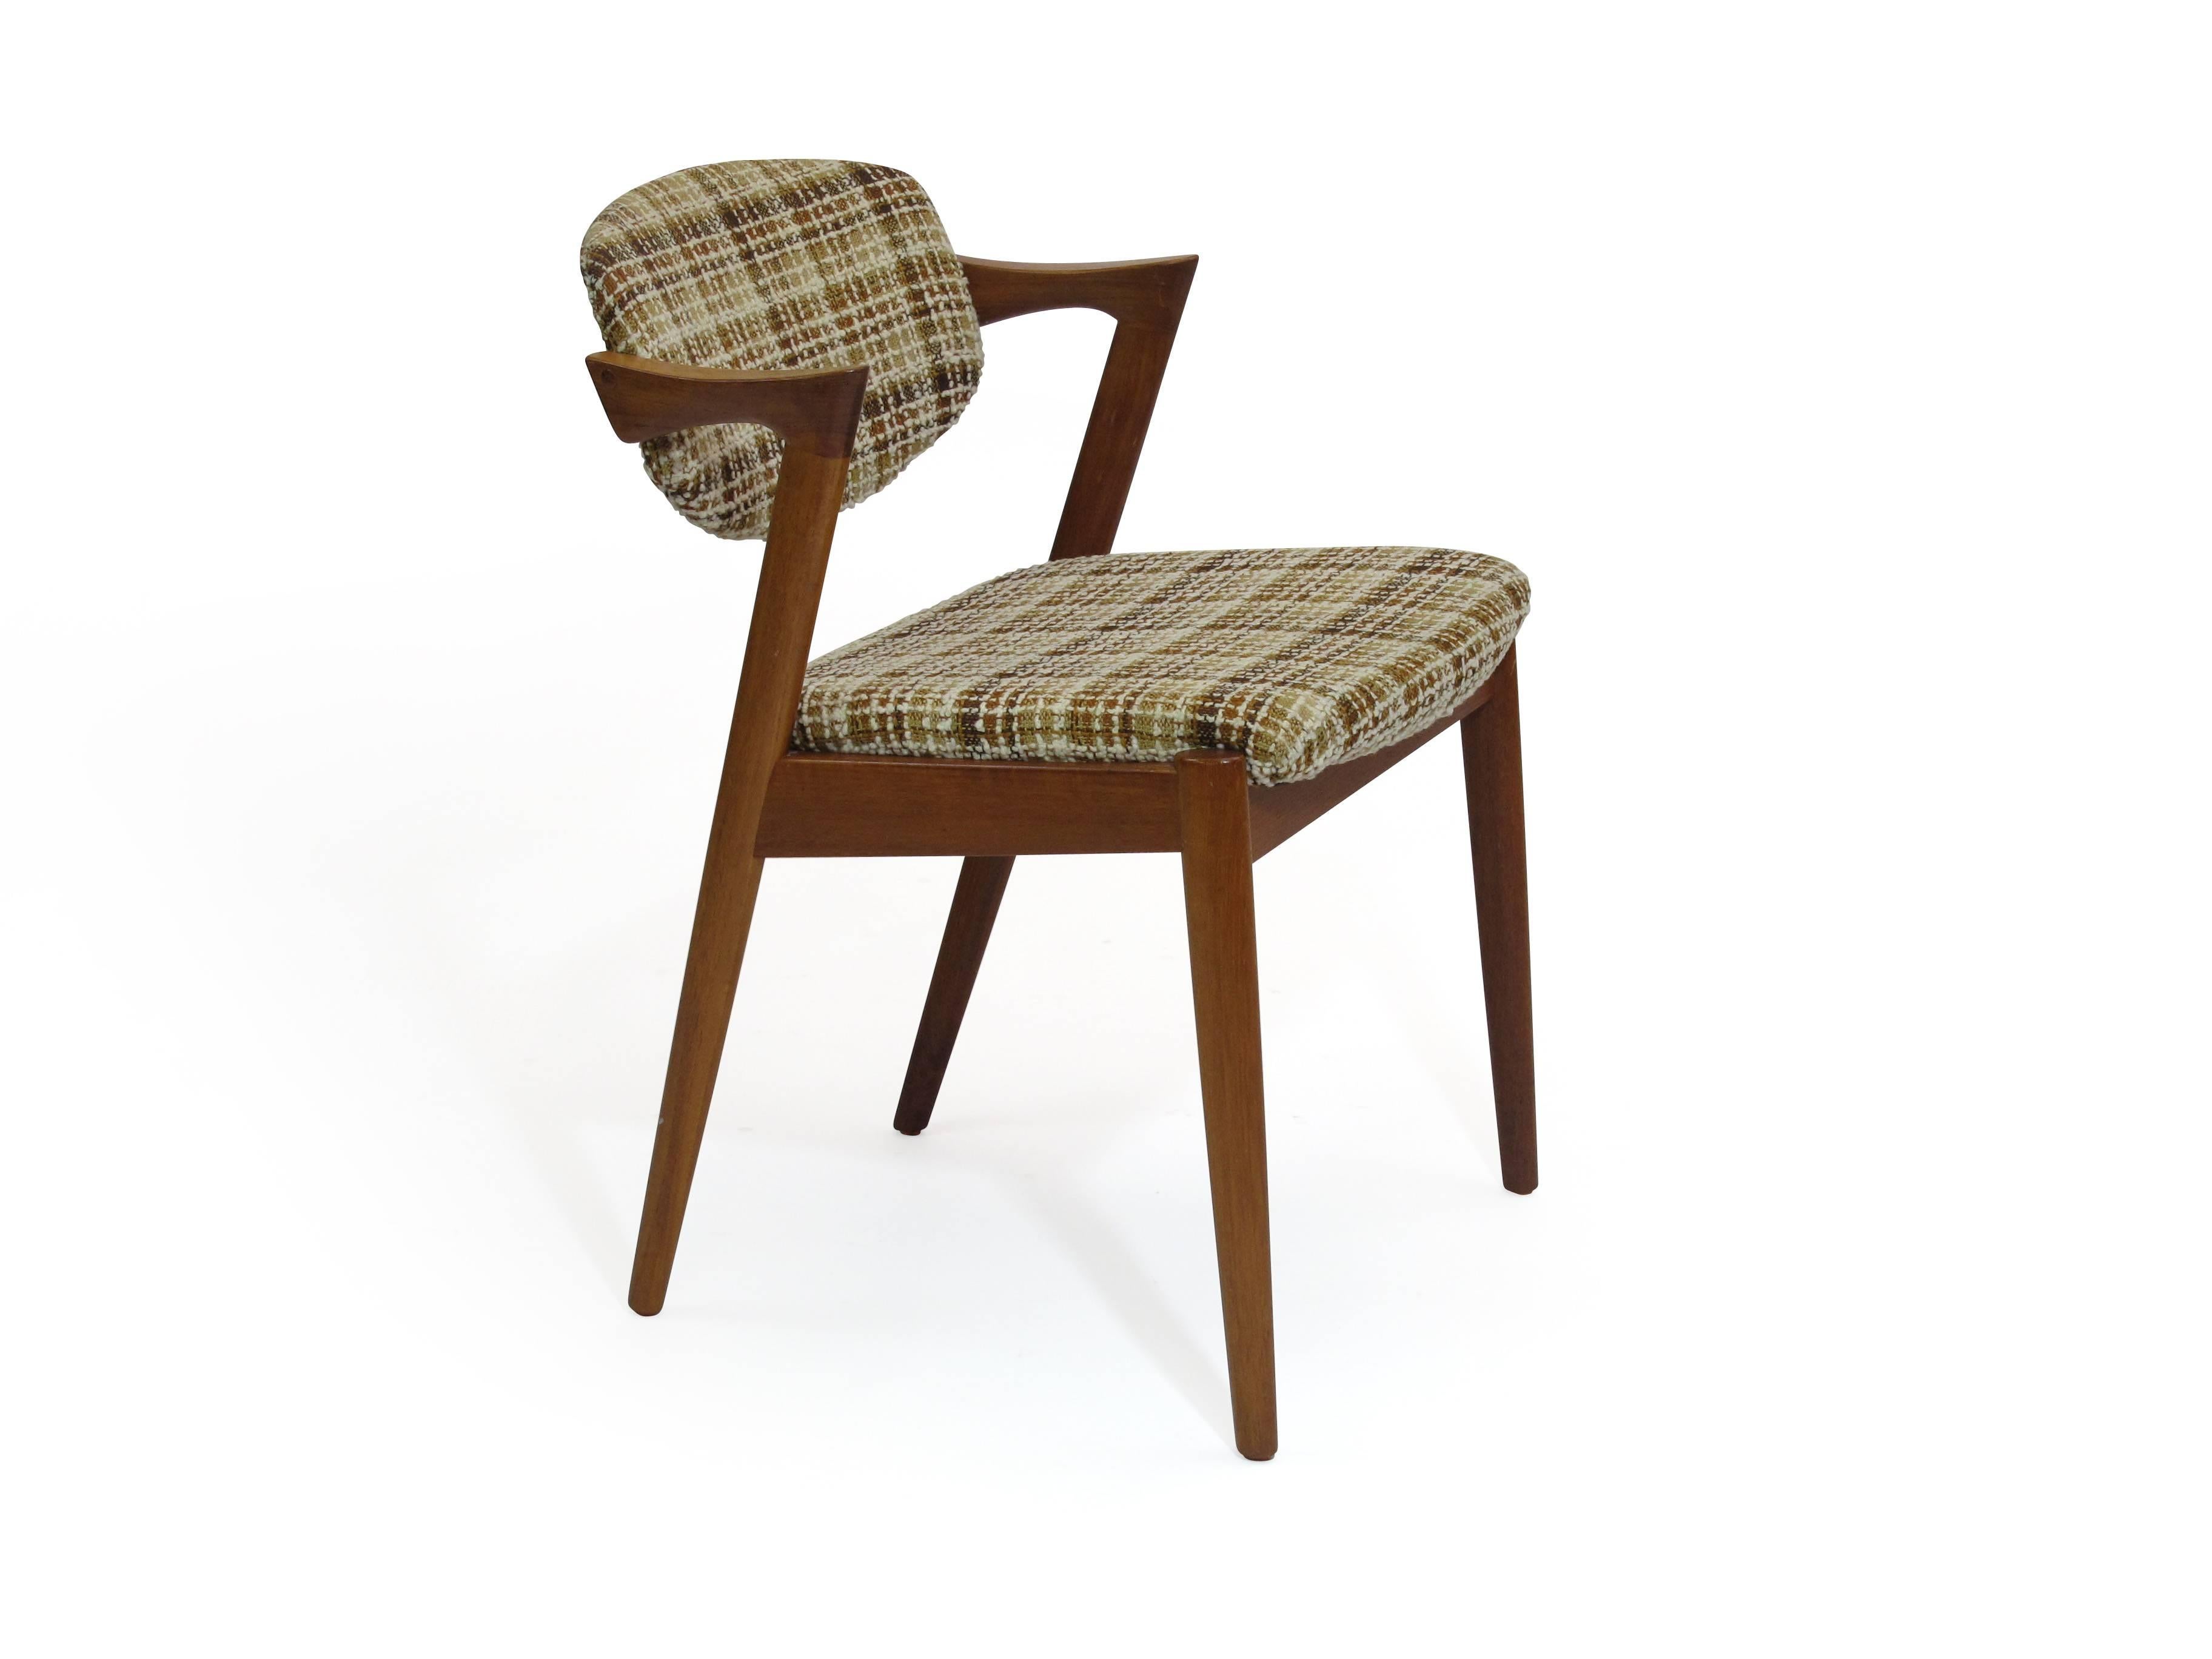 Set of four model #42 teak dining chairs designed by Kai Kristiansen. Solid teak frames with tilting back rest, angled arm rest upholstered in the original vintage fabric. Comfortable chair with modern architectural design. This listing is for 4